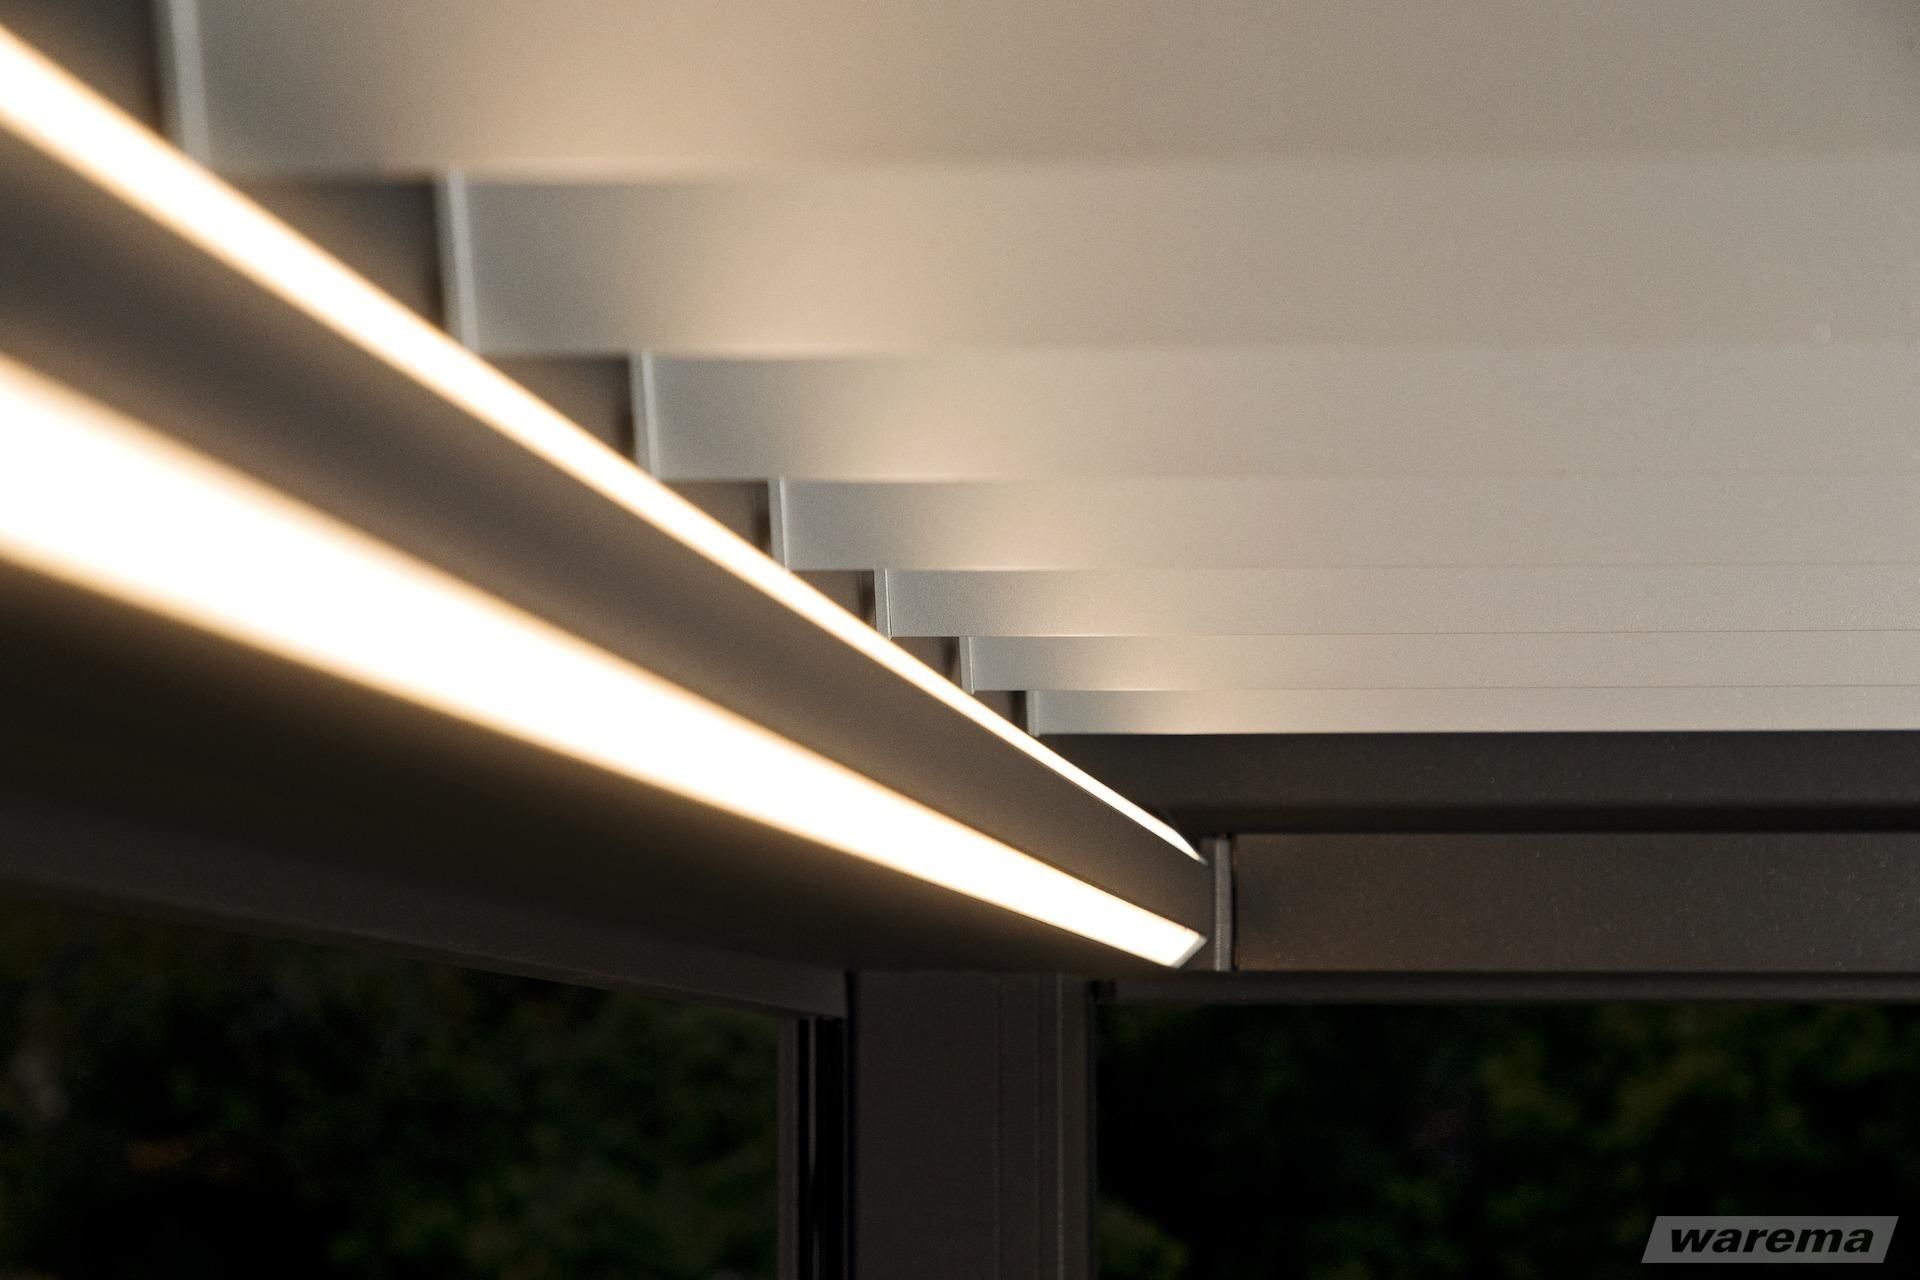 LED strips integrated into the beams